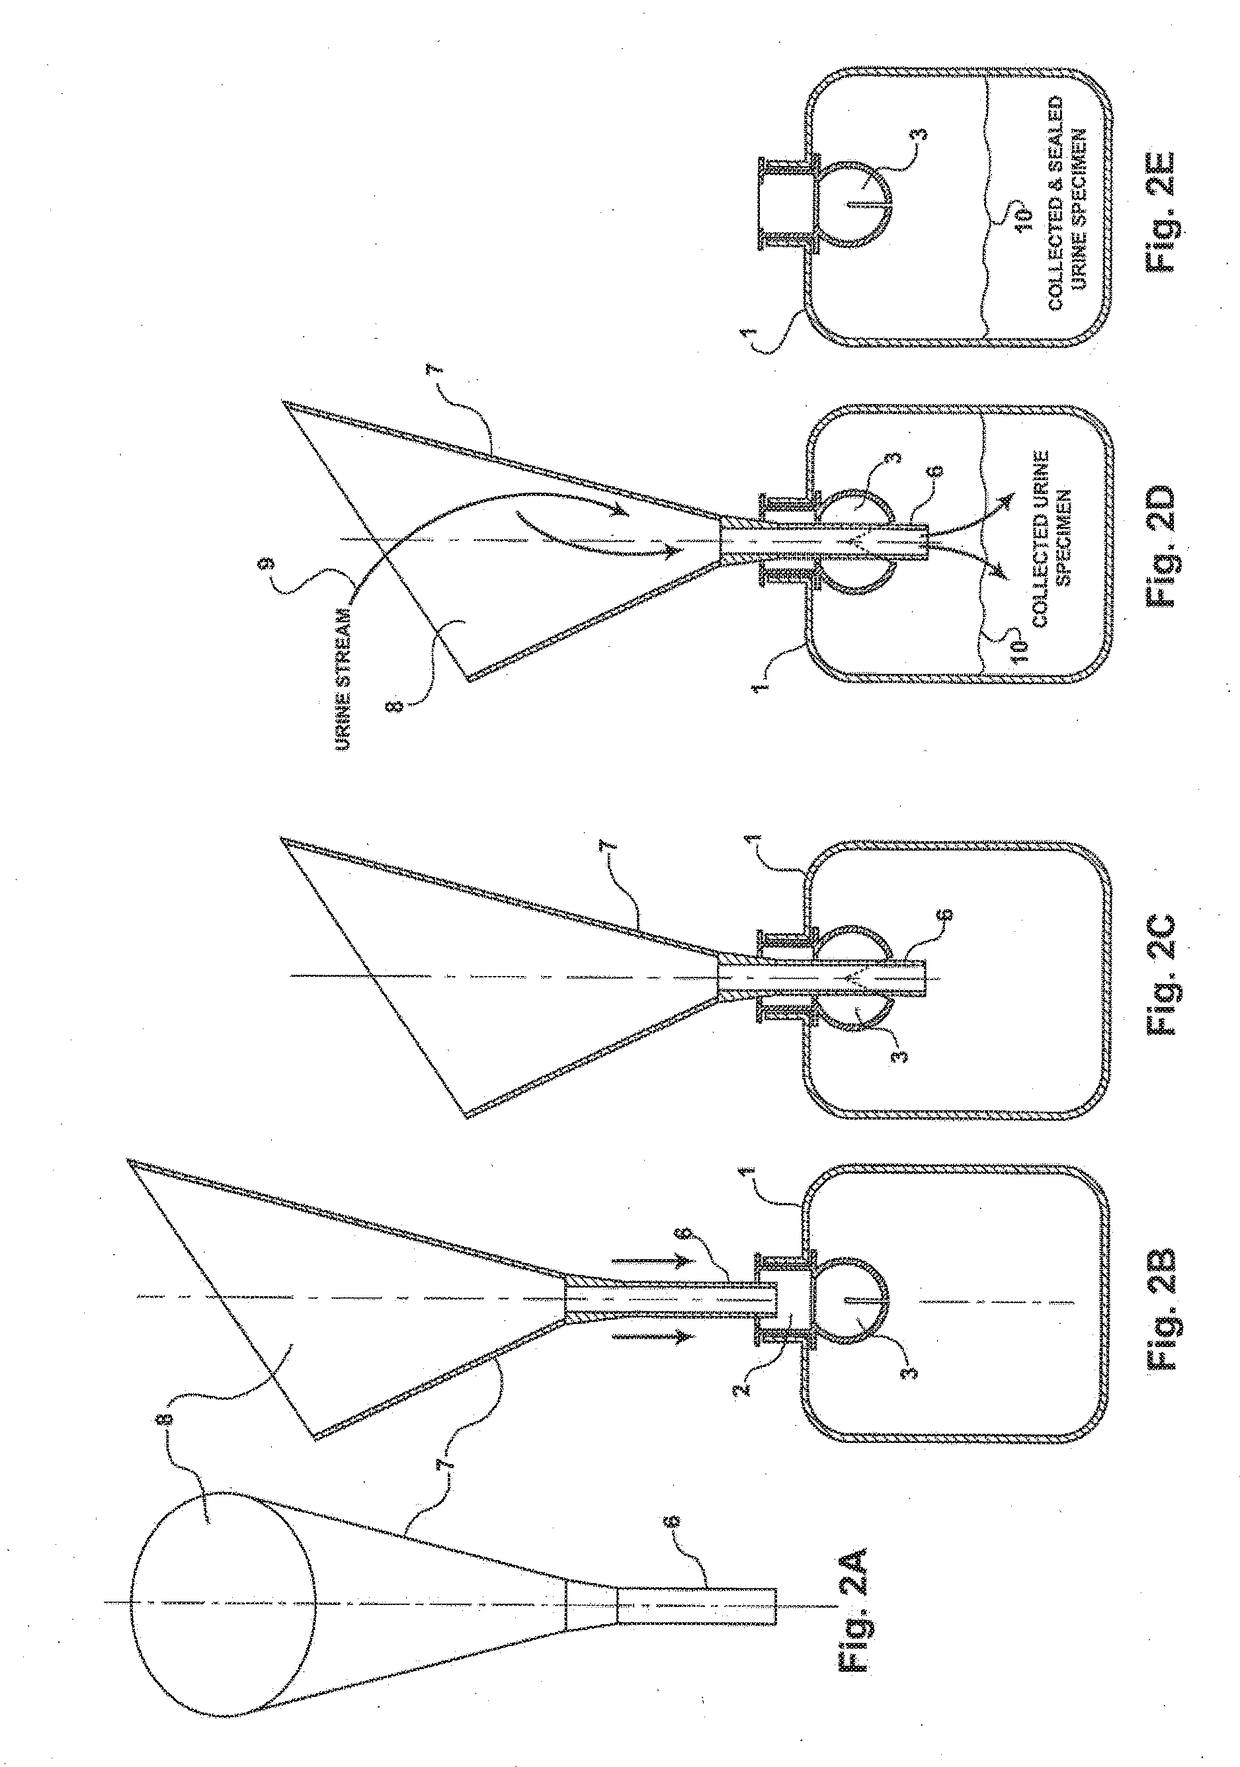 Urine-specimen collection, storage, and testing device